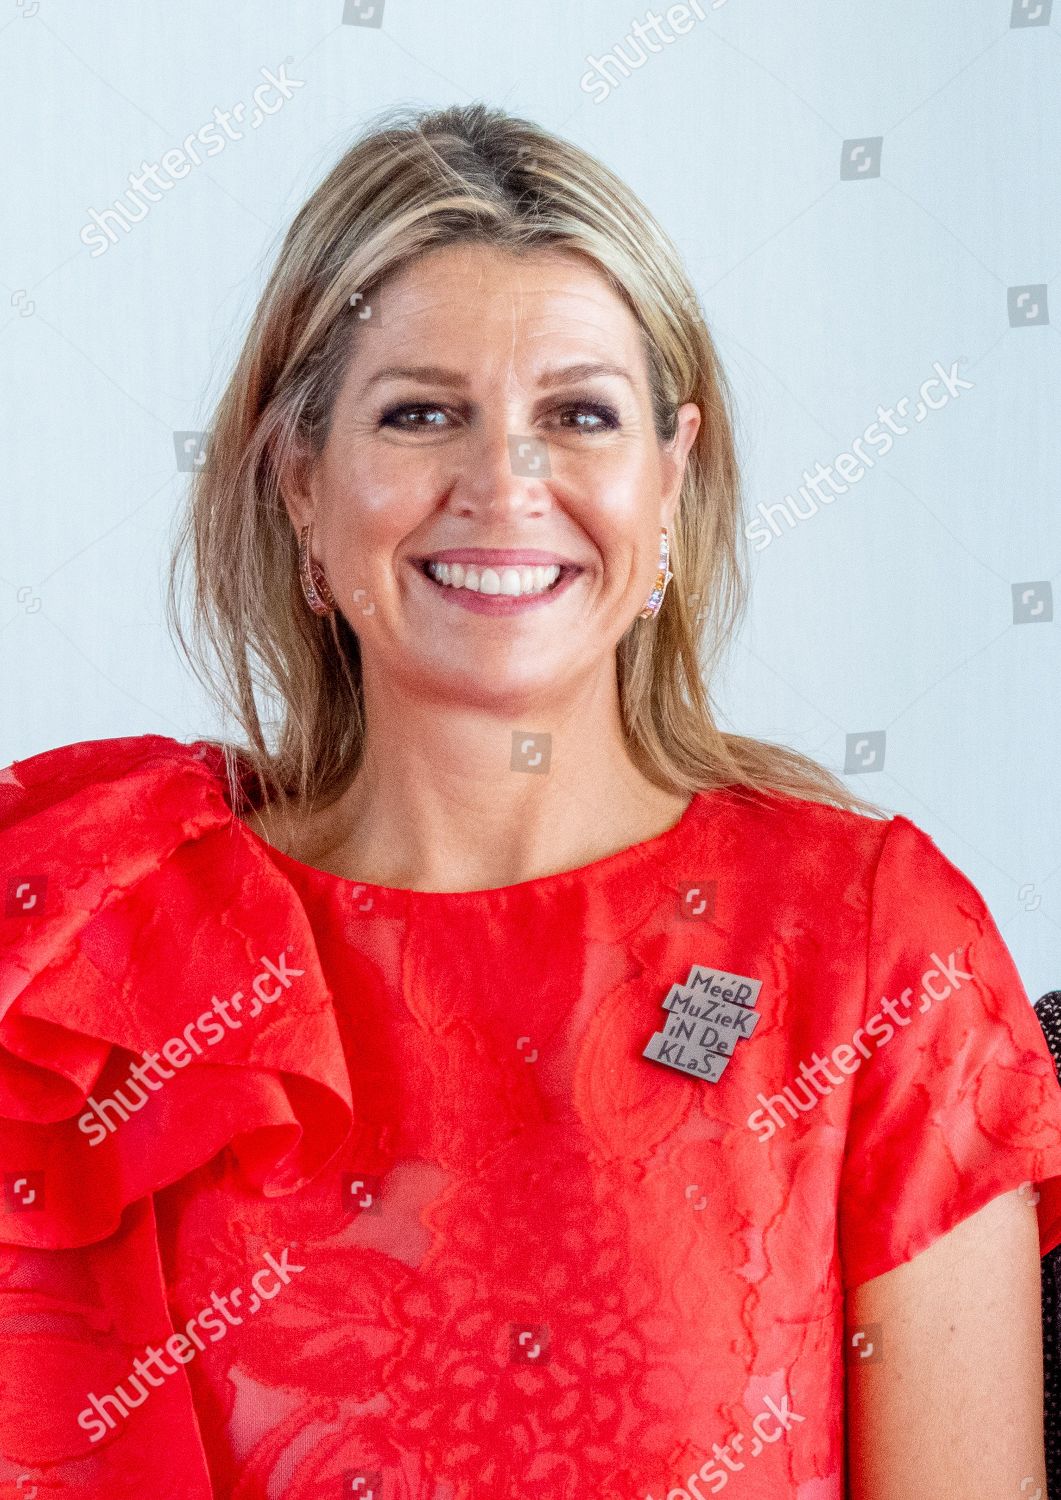 queen-maxima-signing-the-more-music-covenant-in-the-classroom-drenthe-the-netherlands-shutterstock-editorial-10317631q.jpg